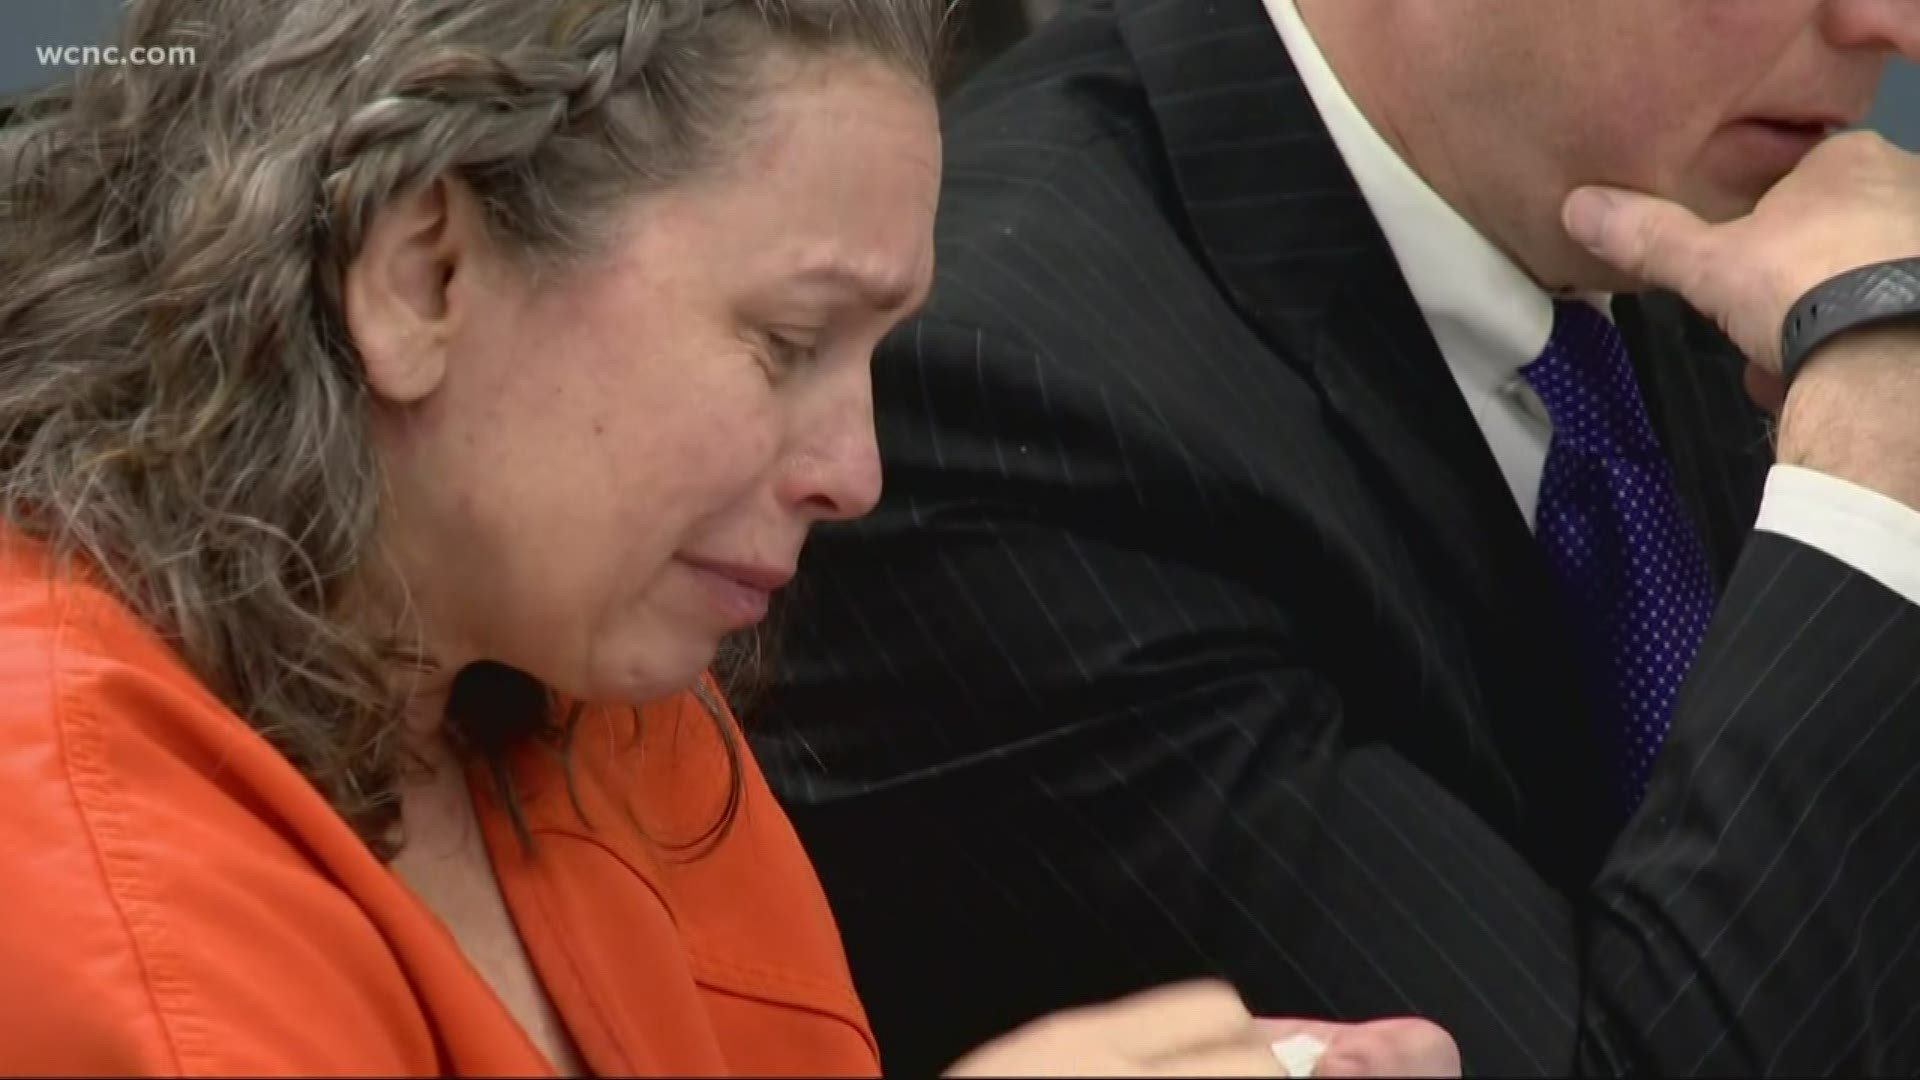 Lana Sue Clayton pleaded guilty to voluntary manslaughter in the death of her husband, 64-year-old Stephen Delvalle Clayton.